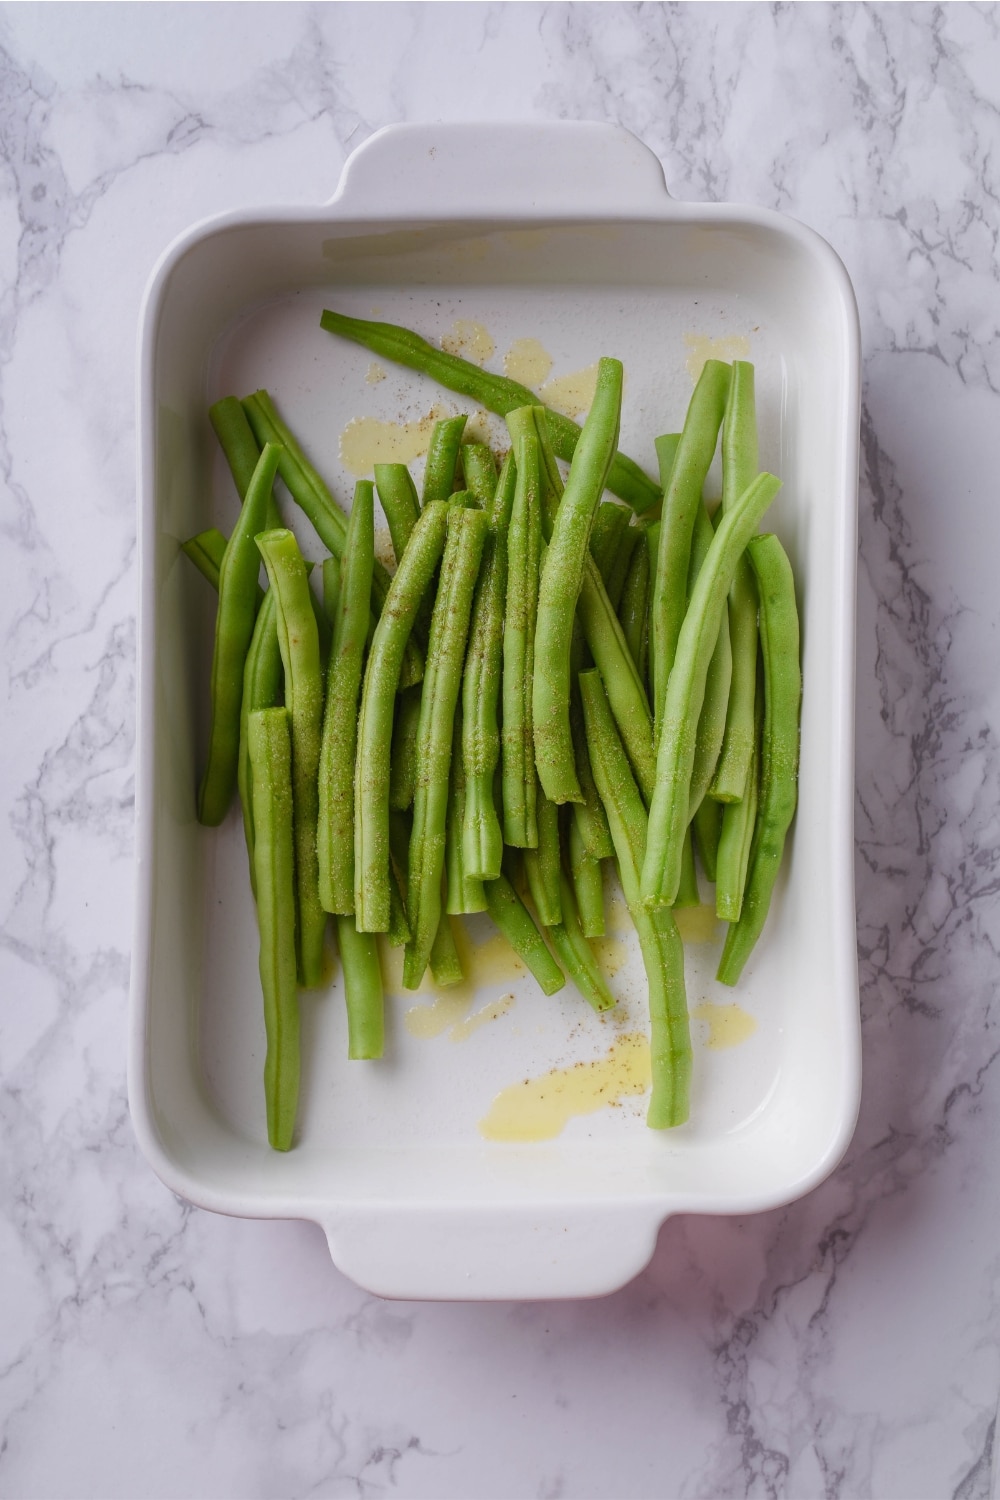 A bunch of green beans in a baking dish.